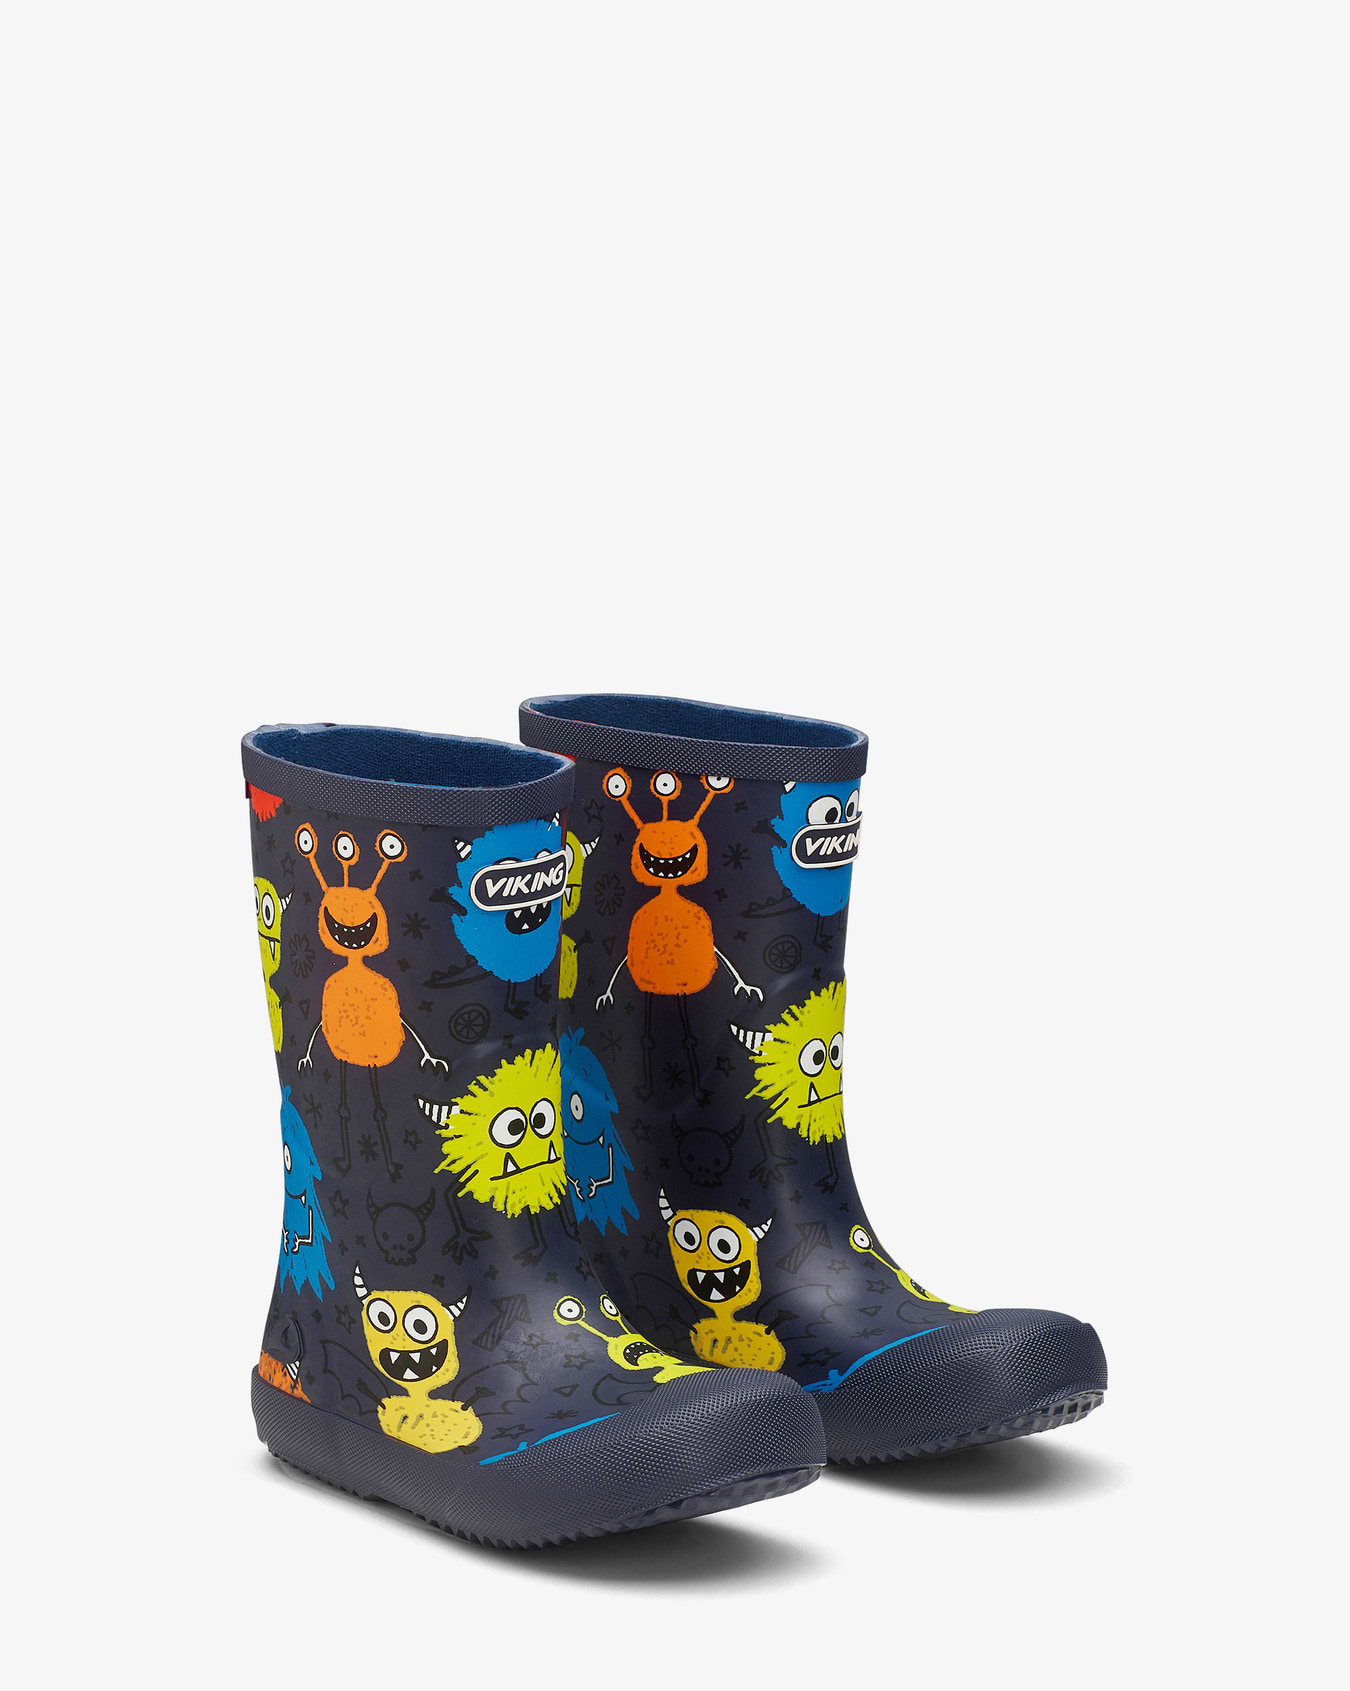 Indie Print Navy/Multi Rubber Boot